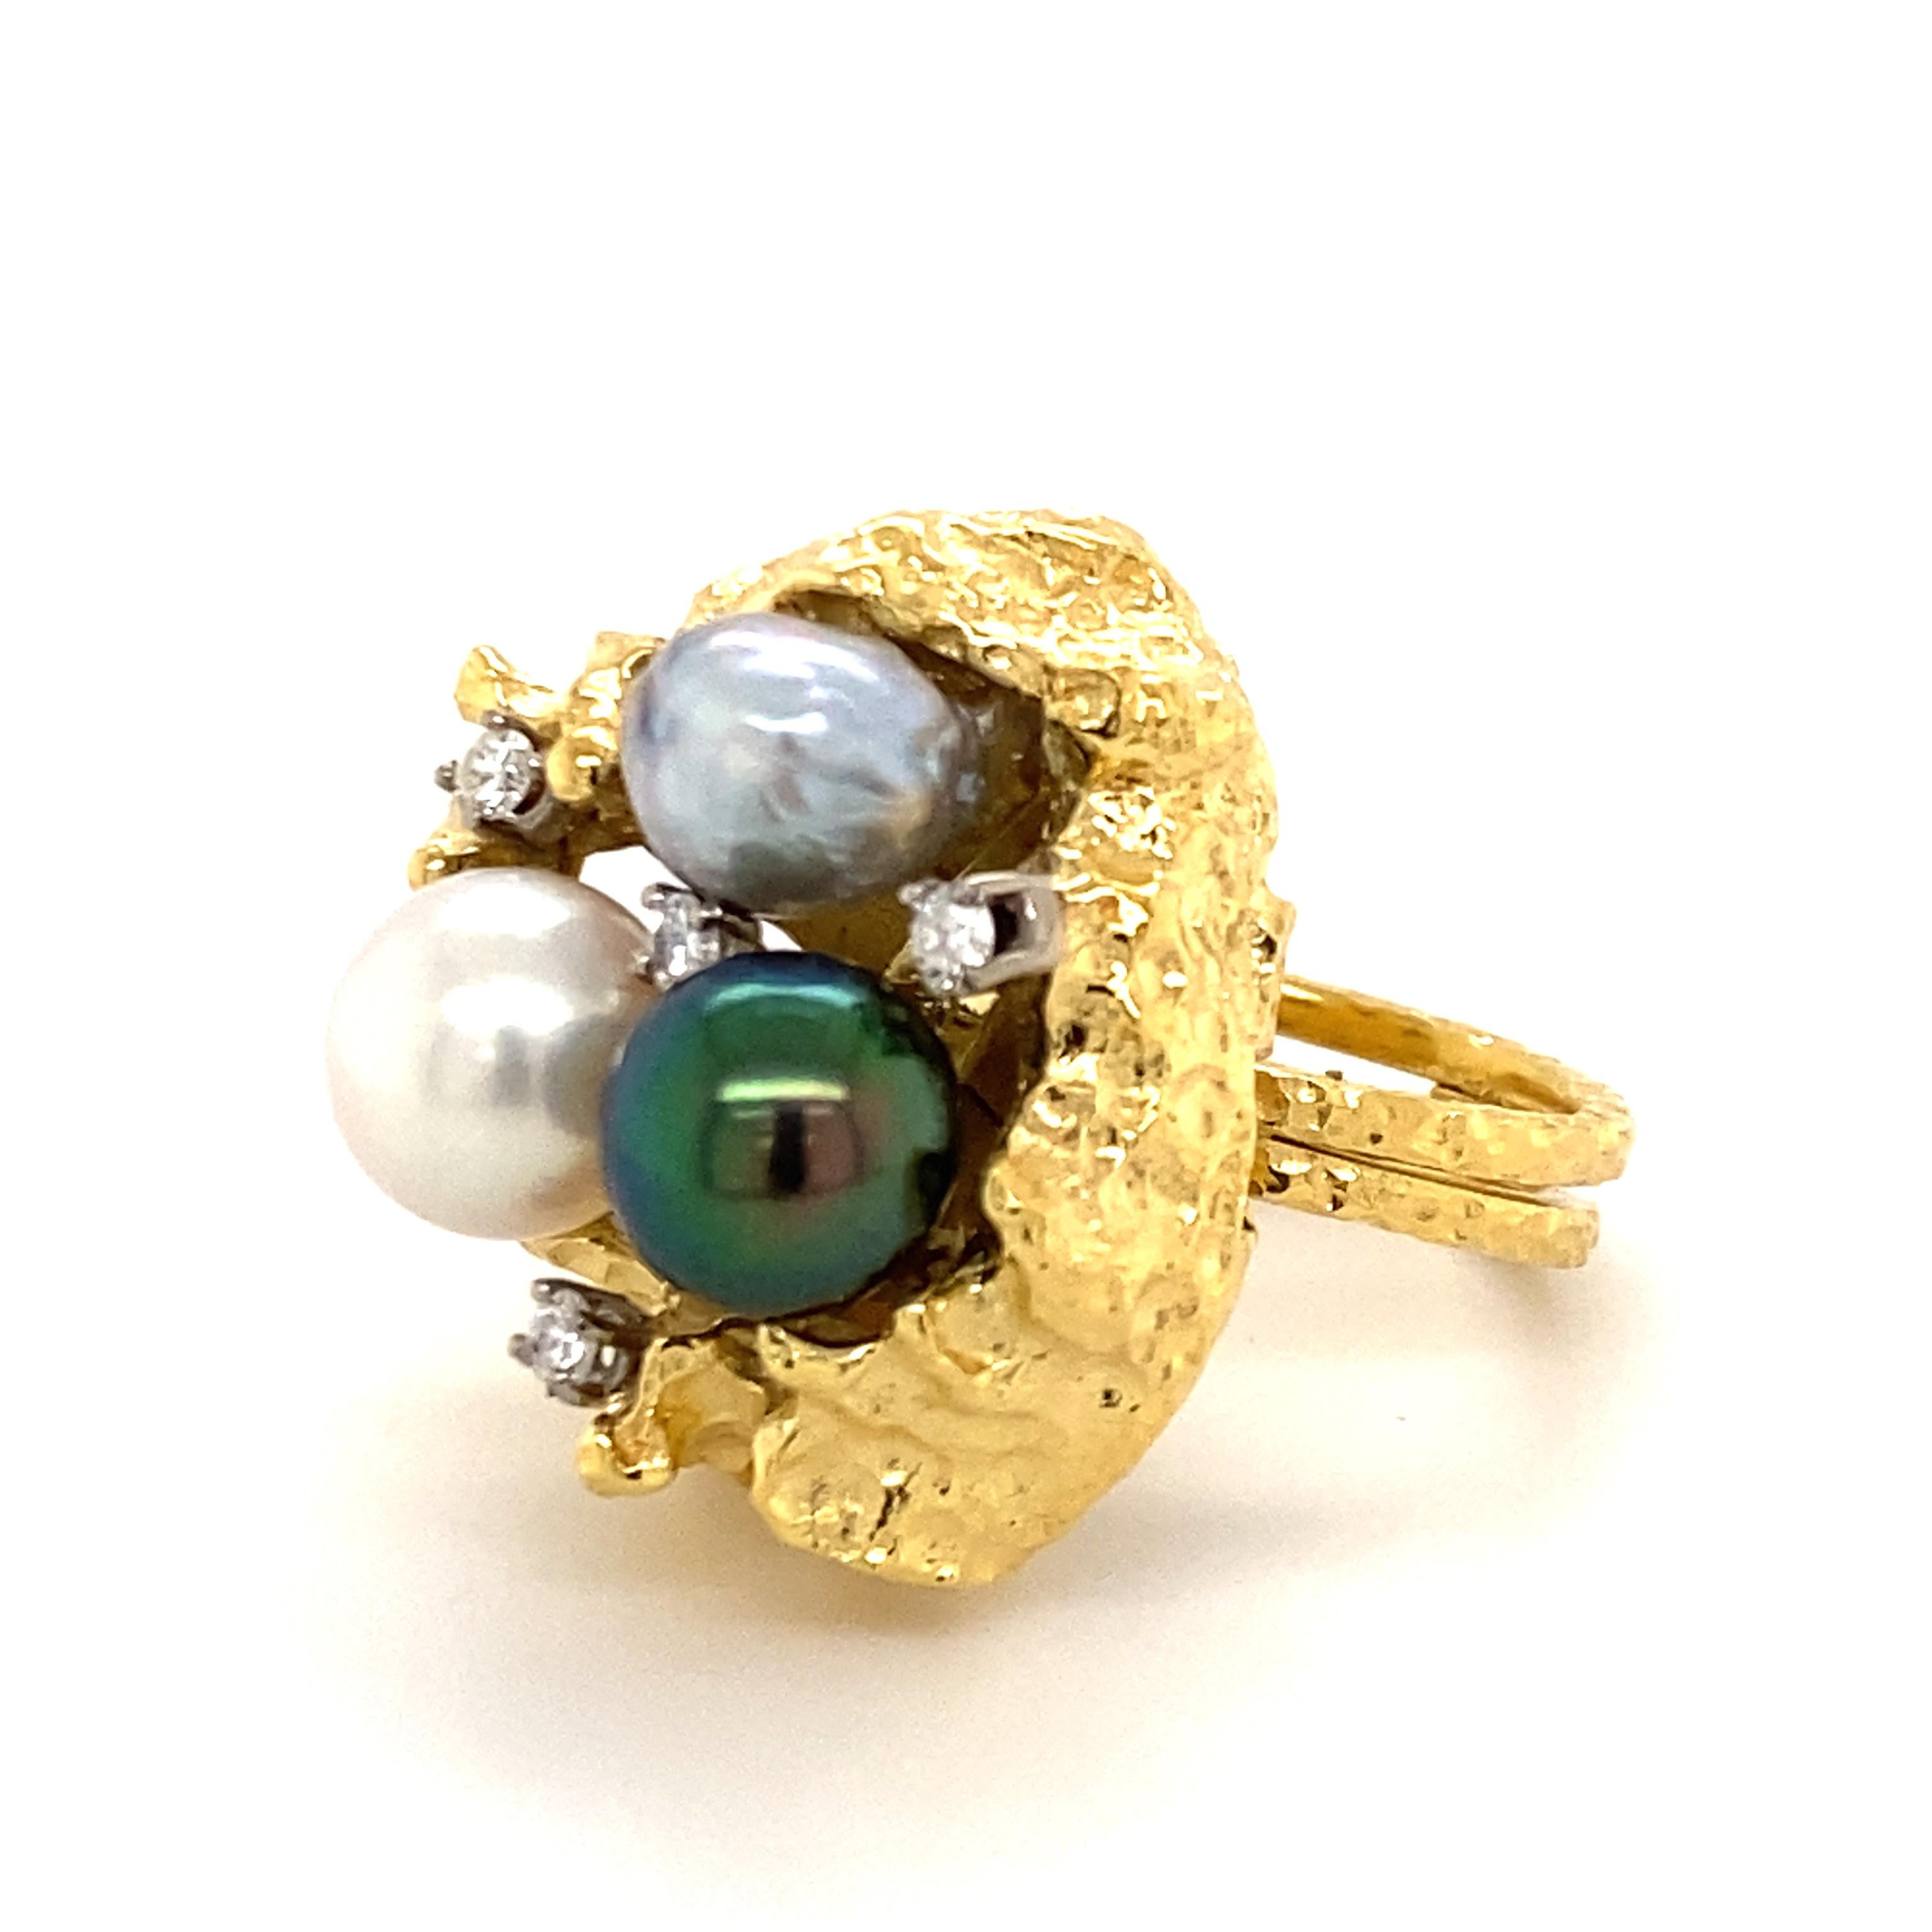 Women's or Men's Bold Retro Ring in 14 Karat Yellow Gold with Cultured Pearls and Diamonds